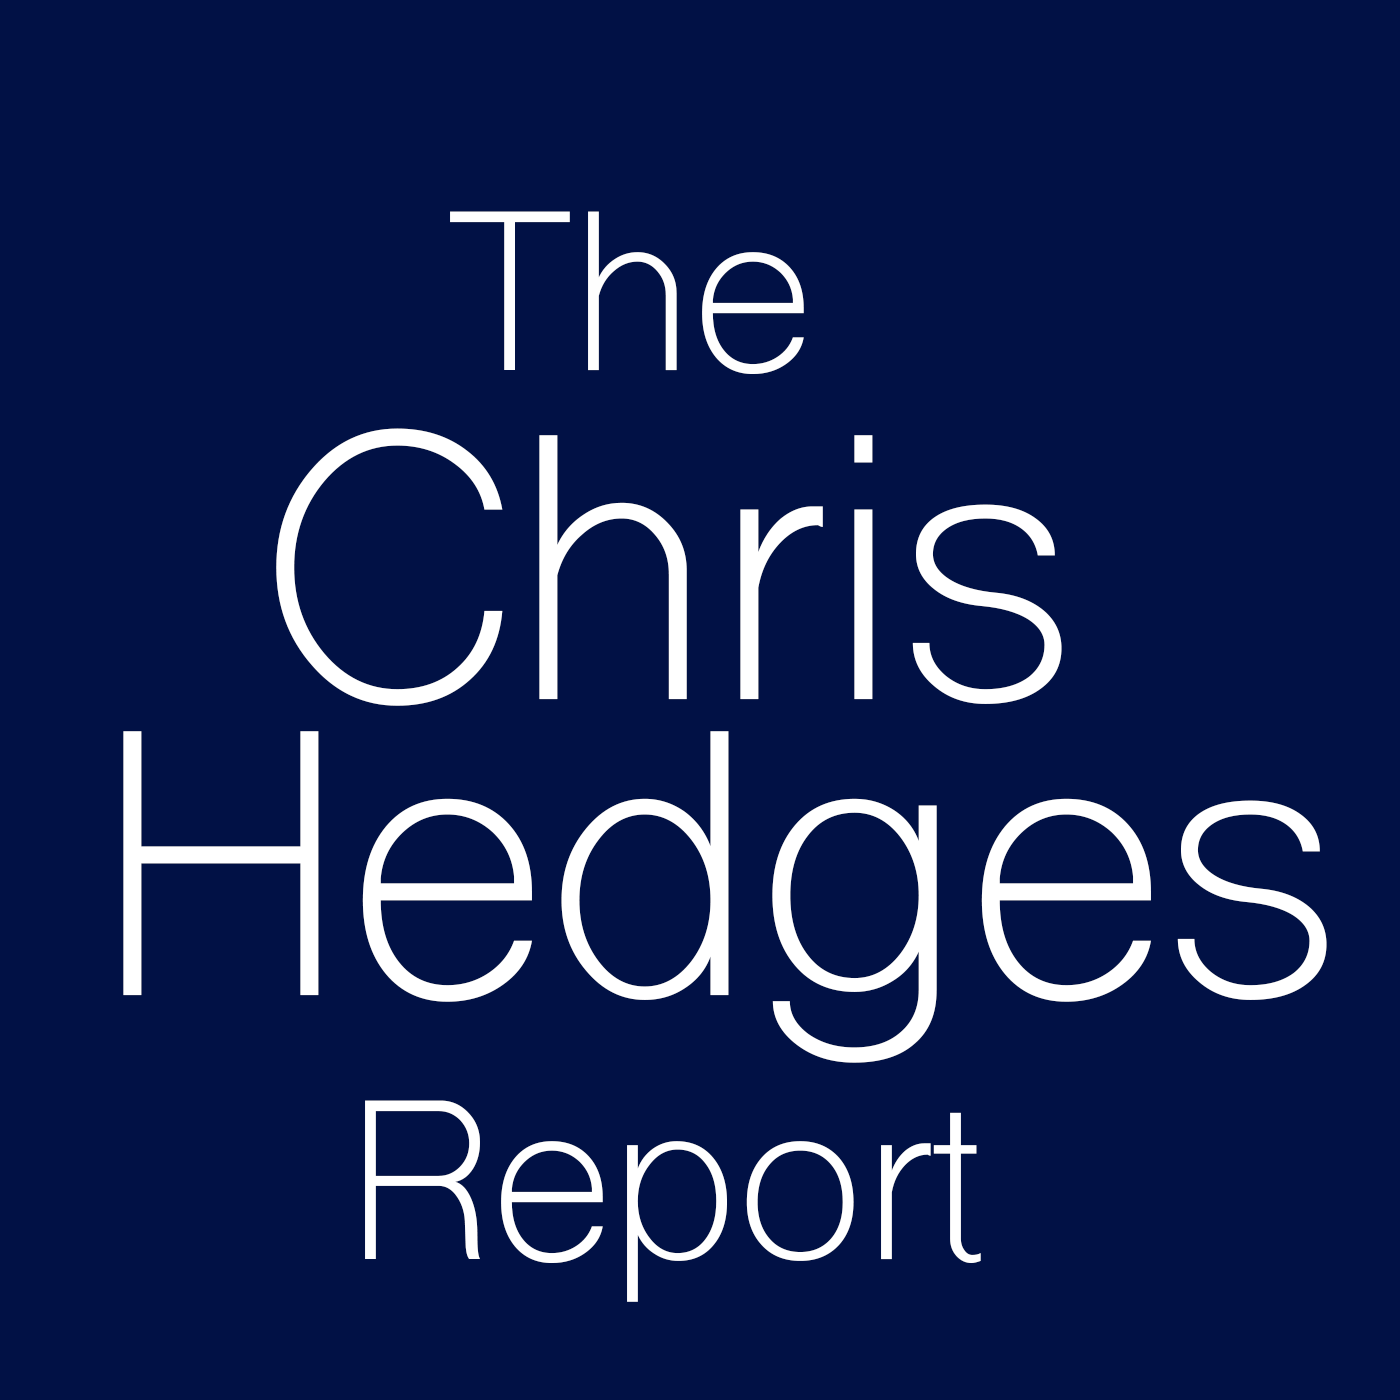 The Chris Hedges Report with John Vailant, author of 